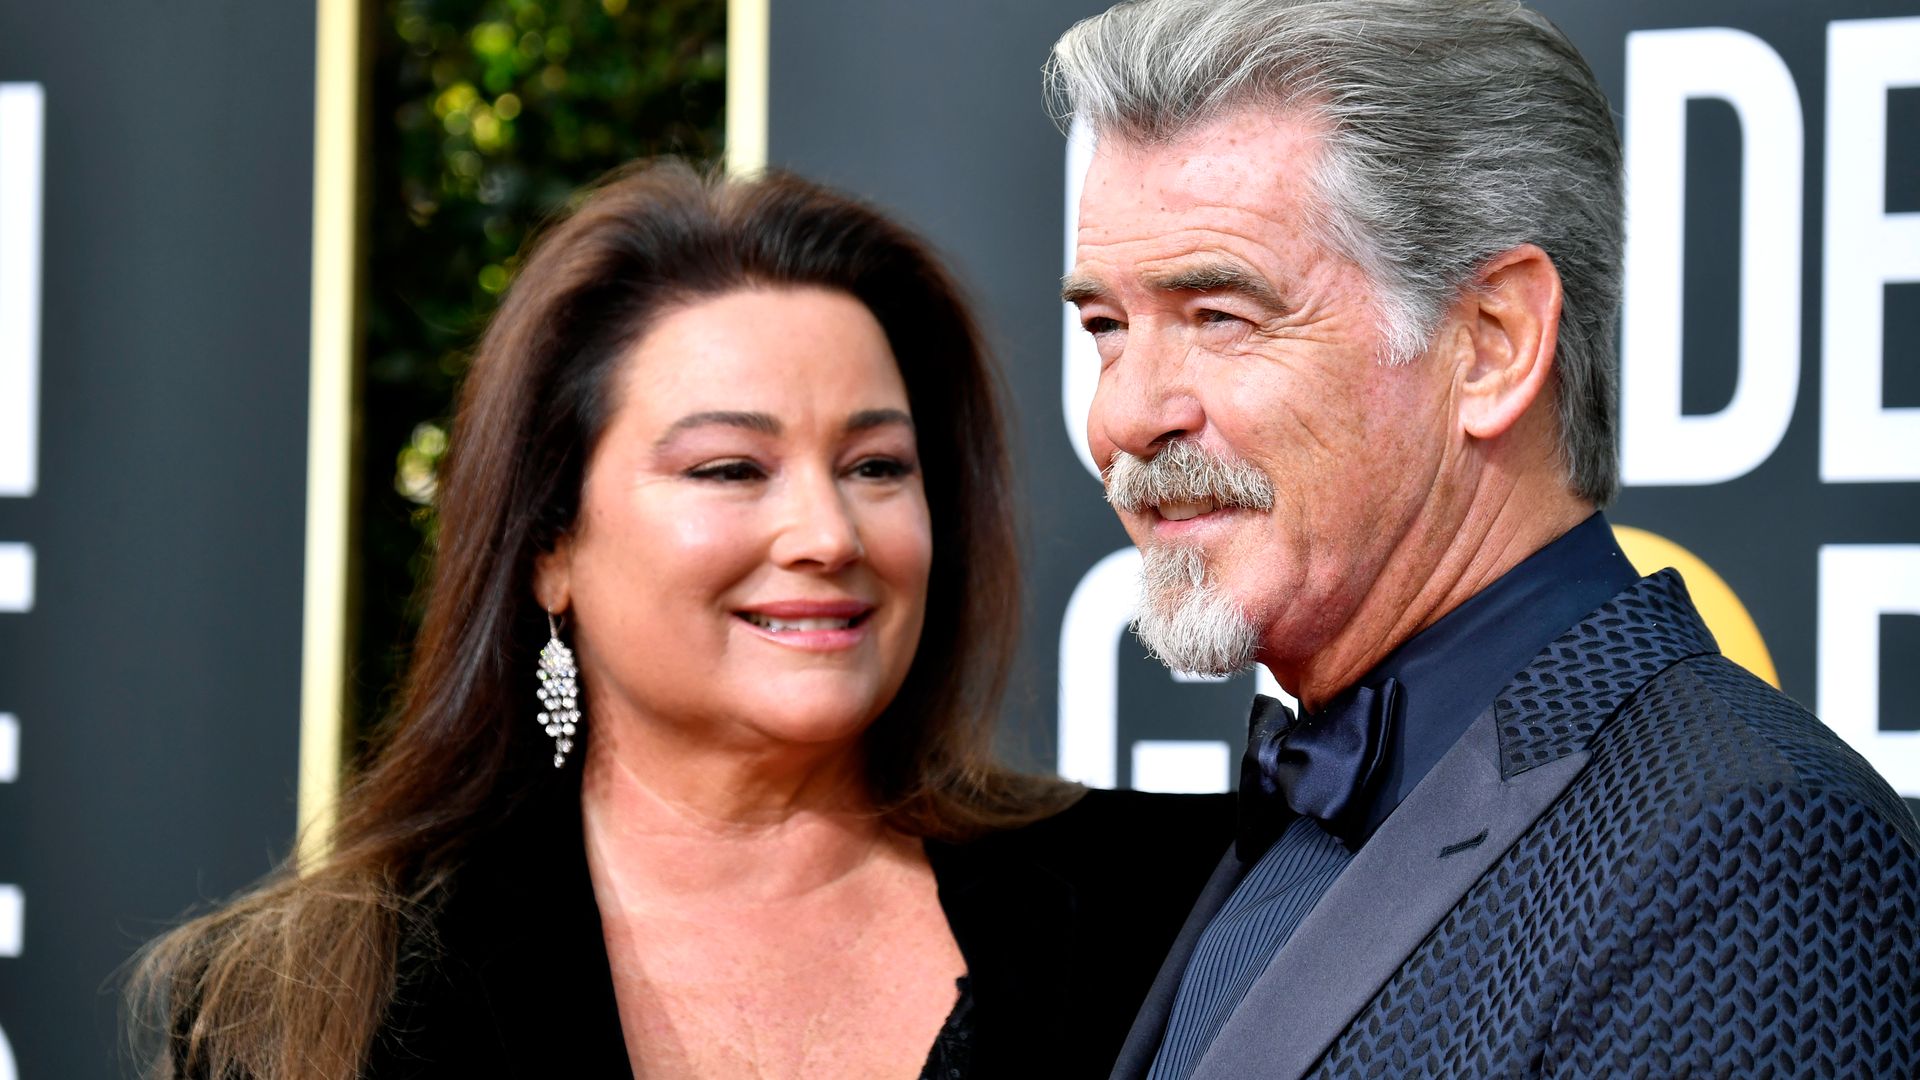 Pierce Brosnan and wife Keely Shaye Brosnan at the 77th Annual Golden Globe Awards